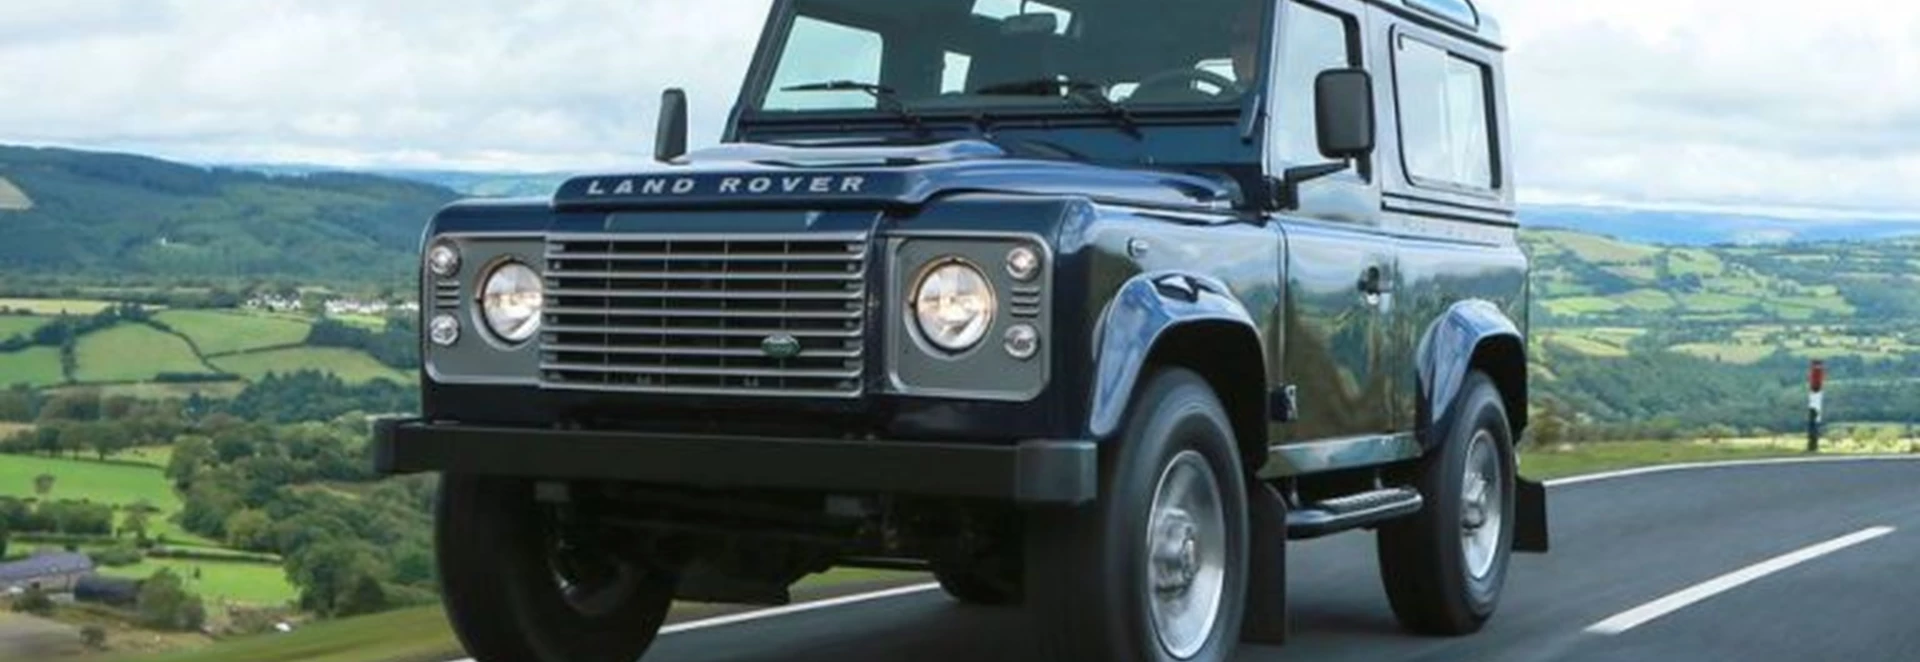 Land Rover fan wants to save last Defender for the nation